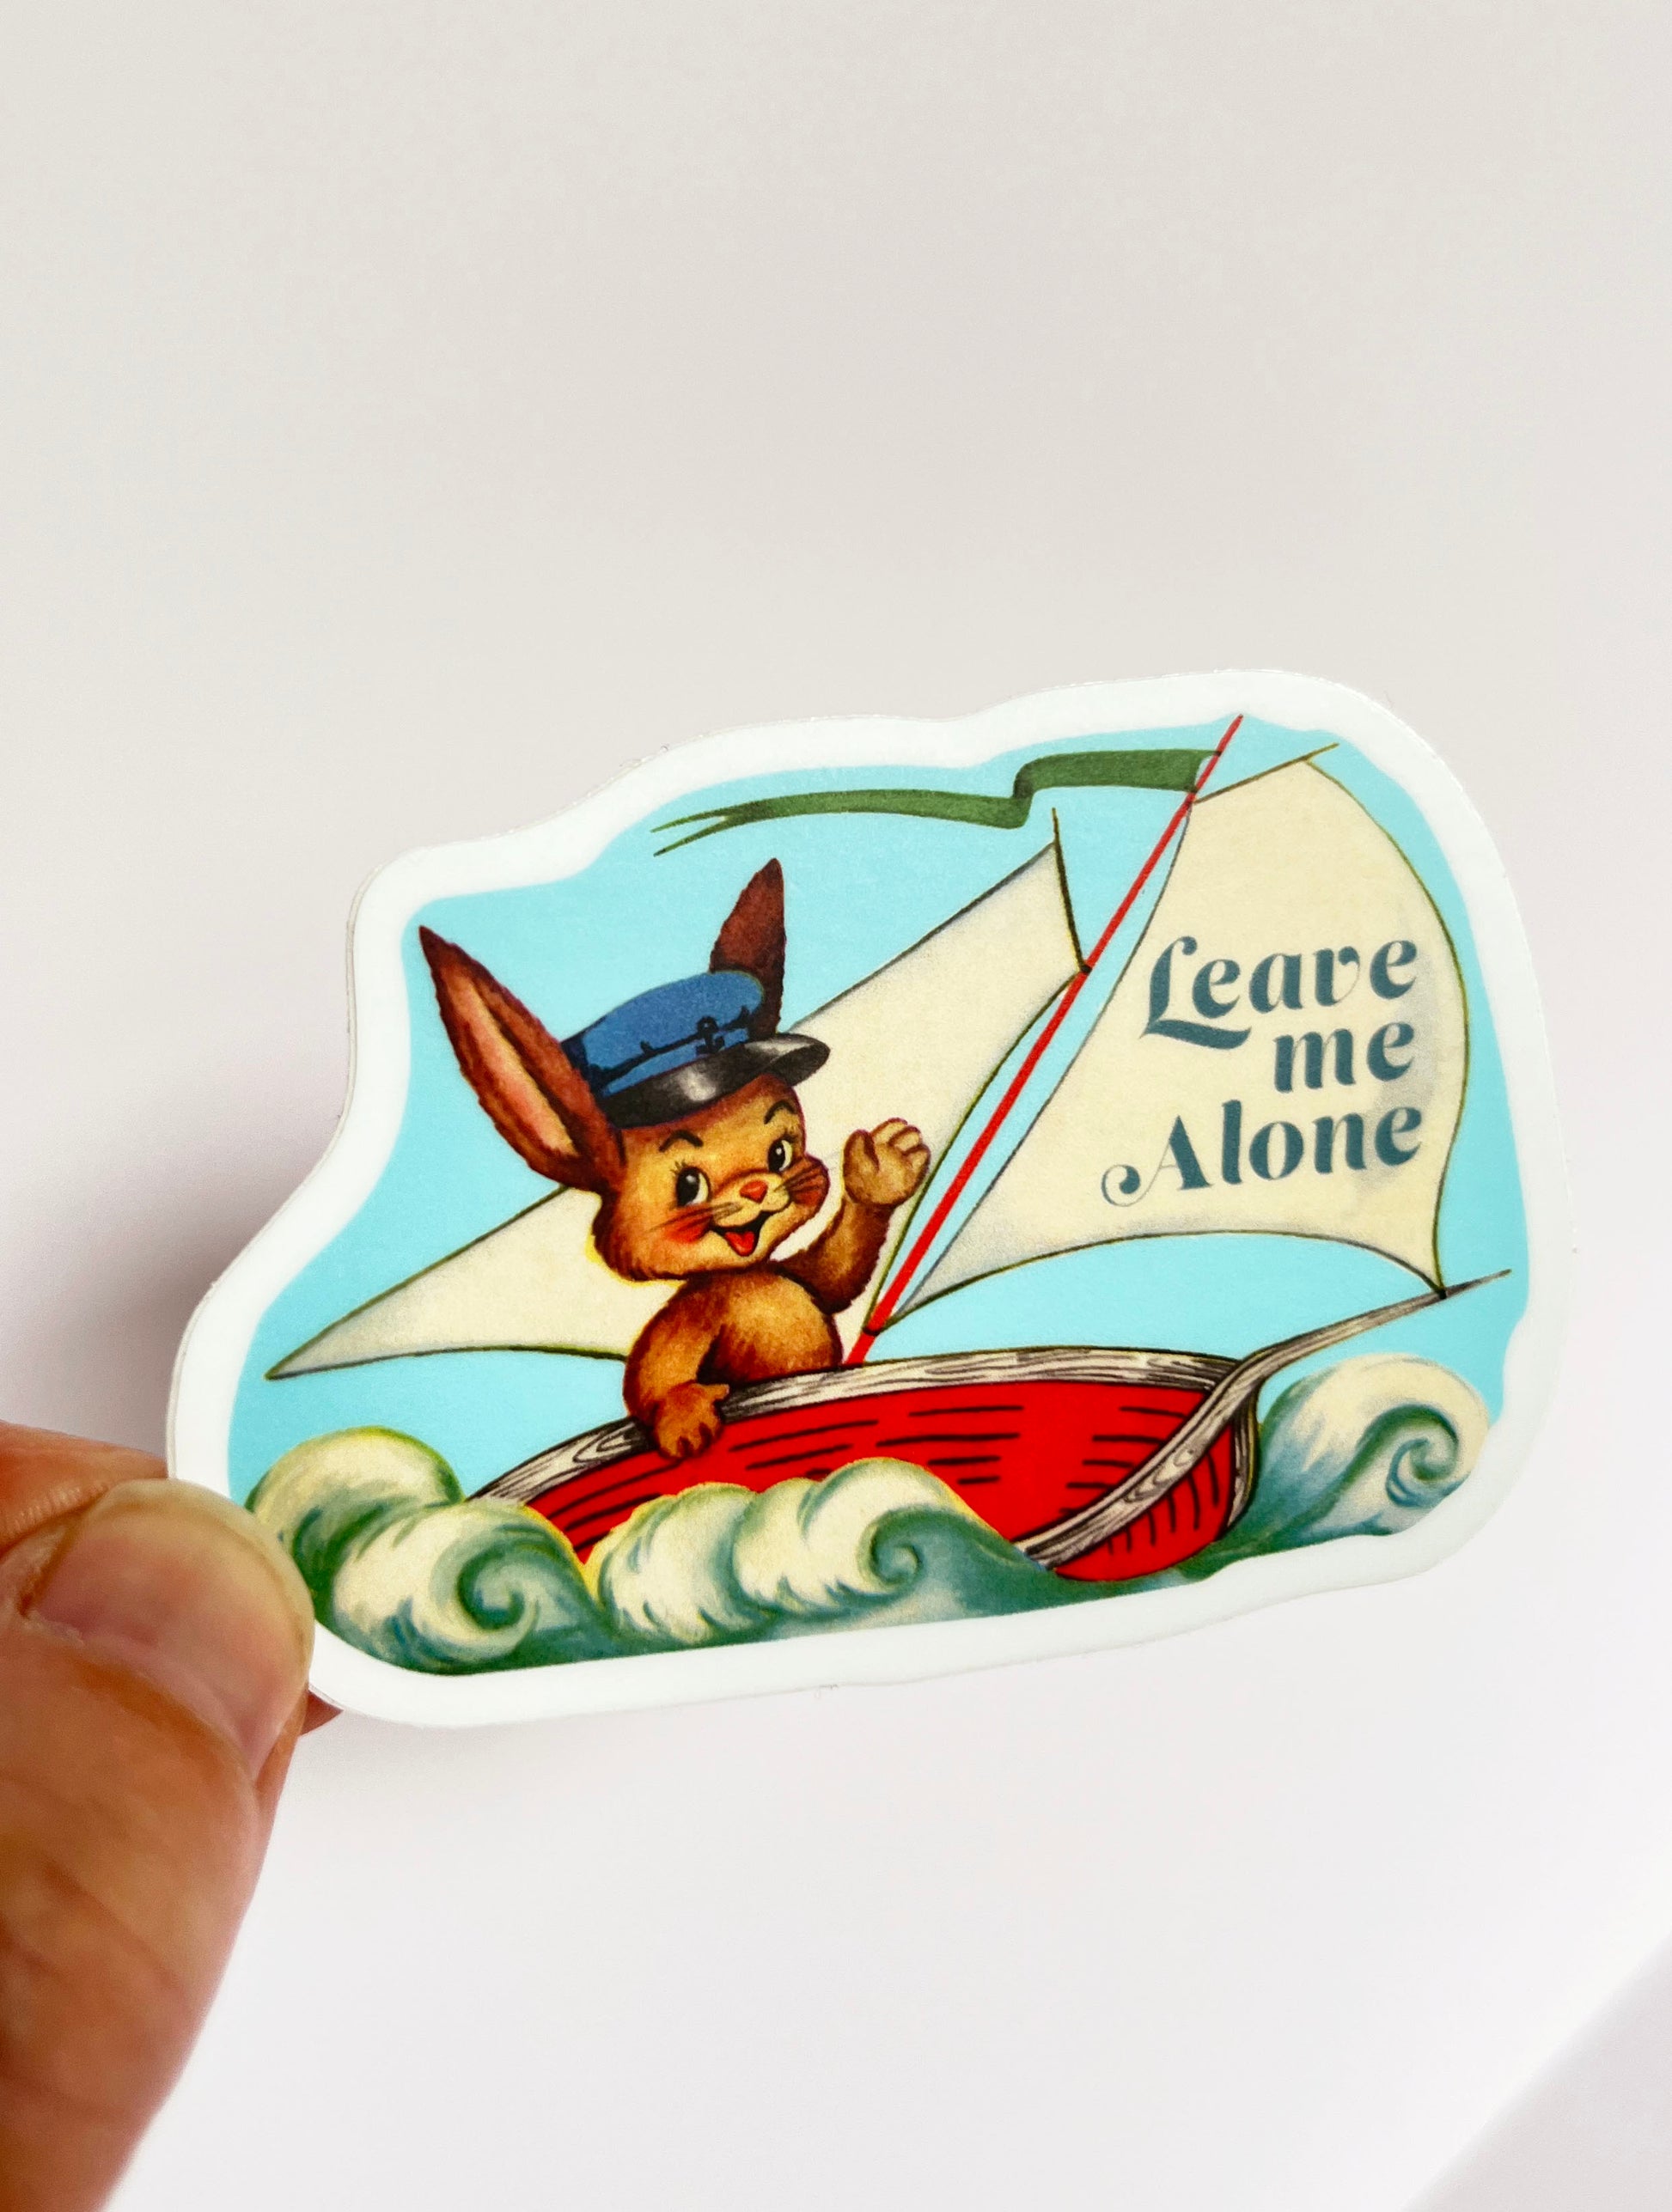 coin laundry cute vintage style stickers bunny rabbit on boat leave me alone cute animal on boat that says leave me alone